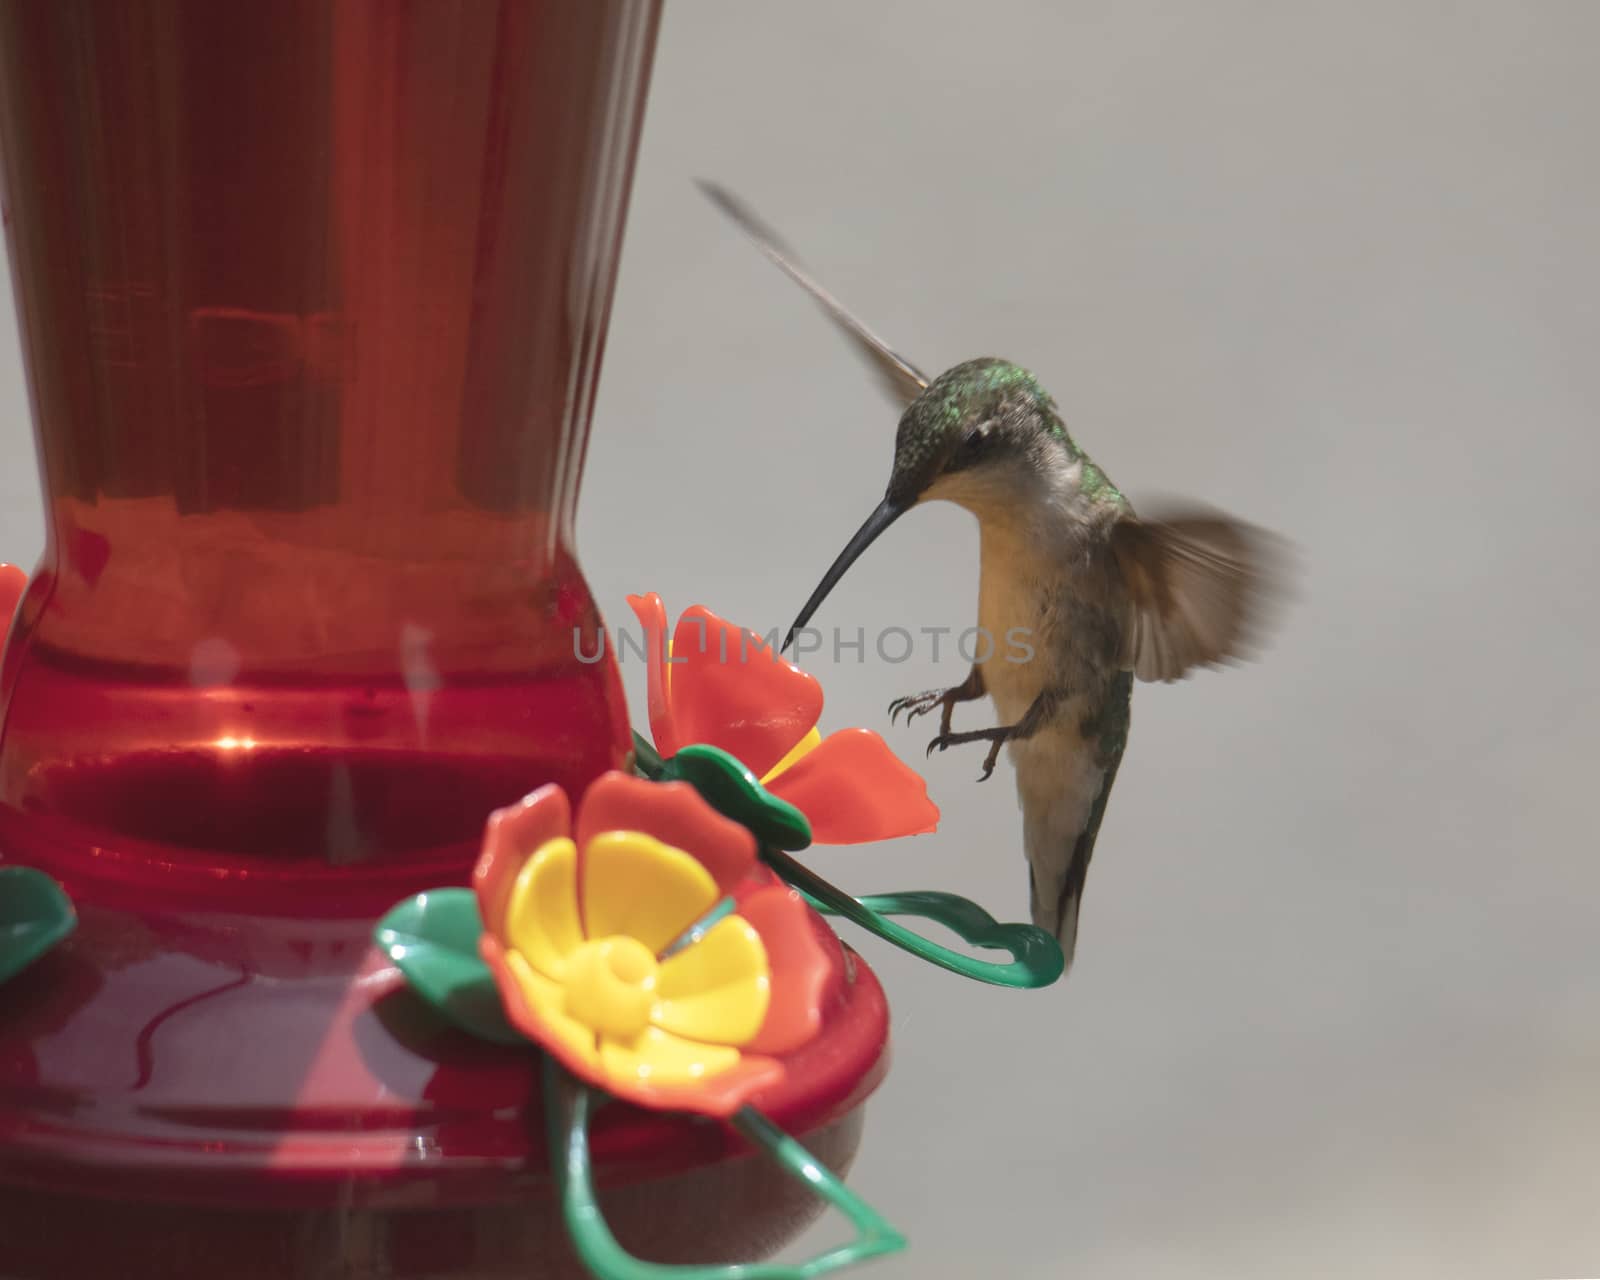 Female ruby-throated hummingbird appears to be be hovering on its tails at a feeder.